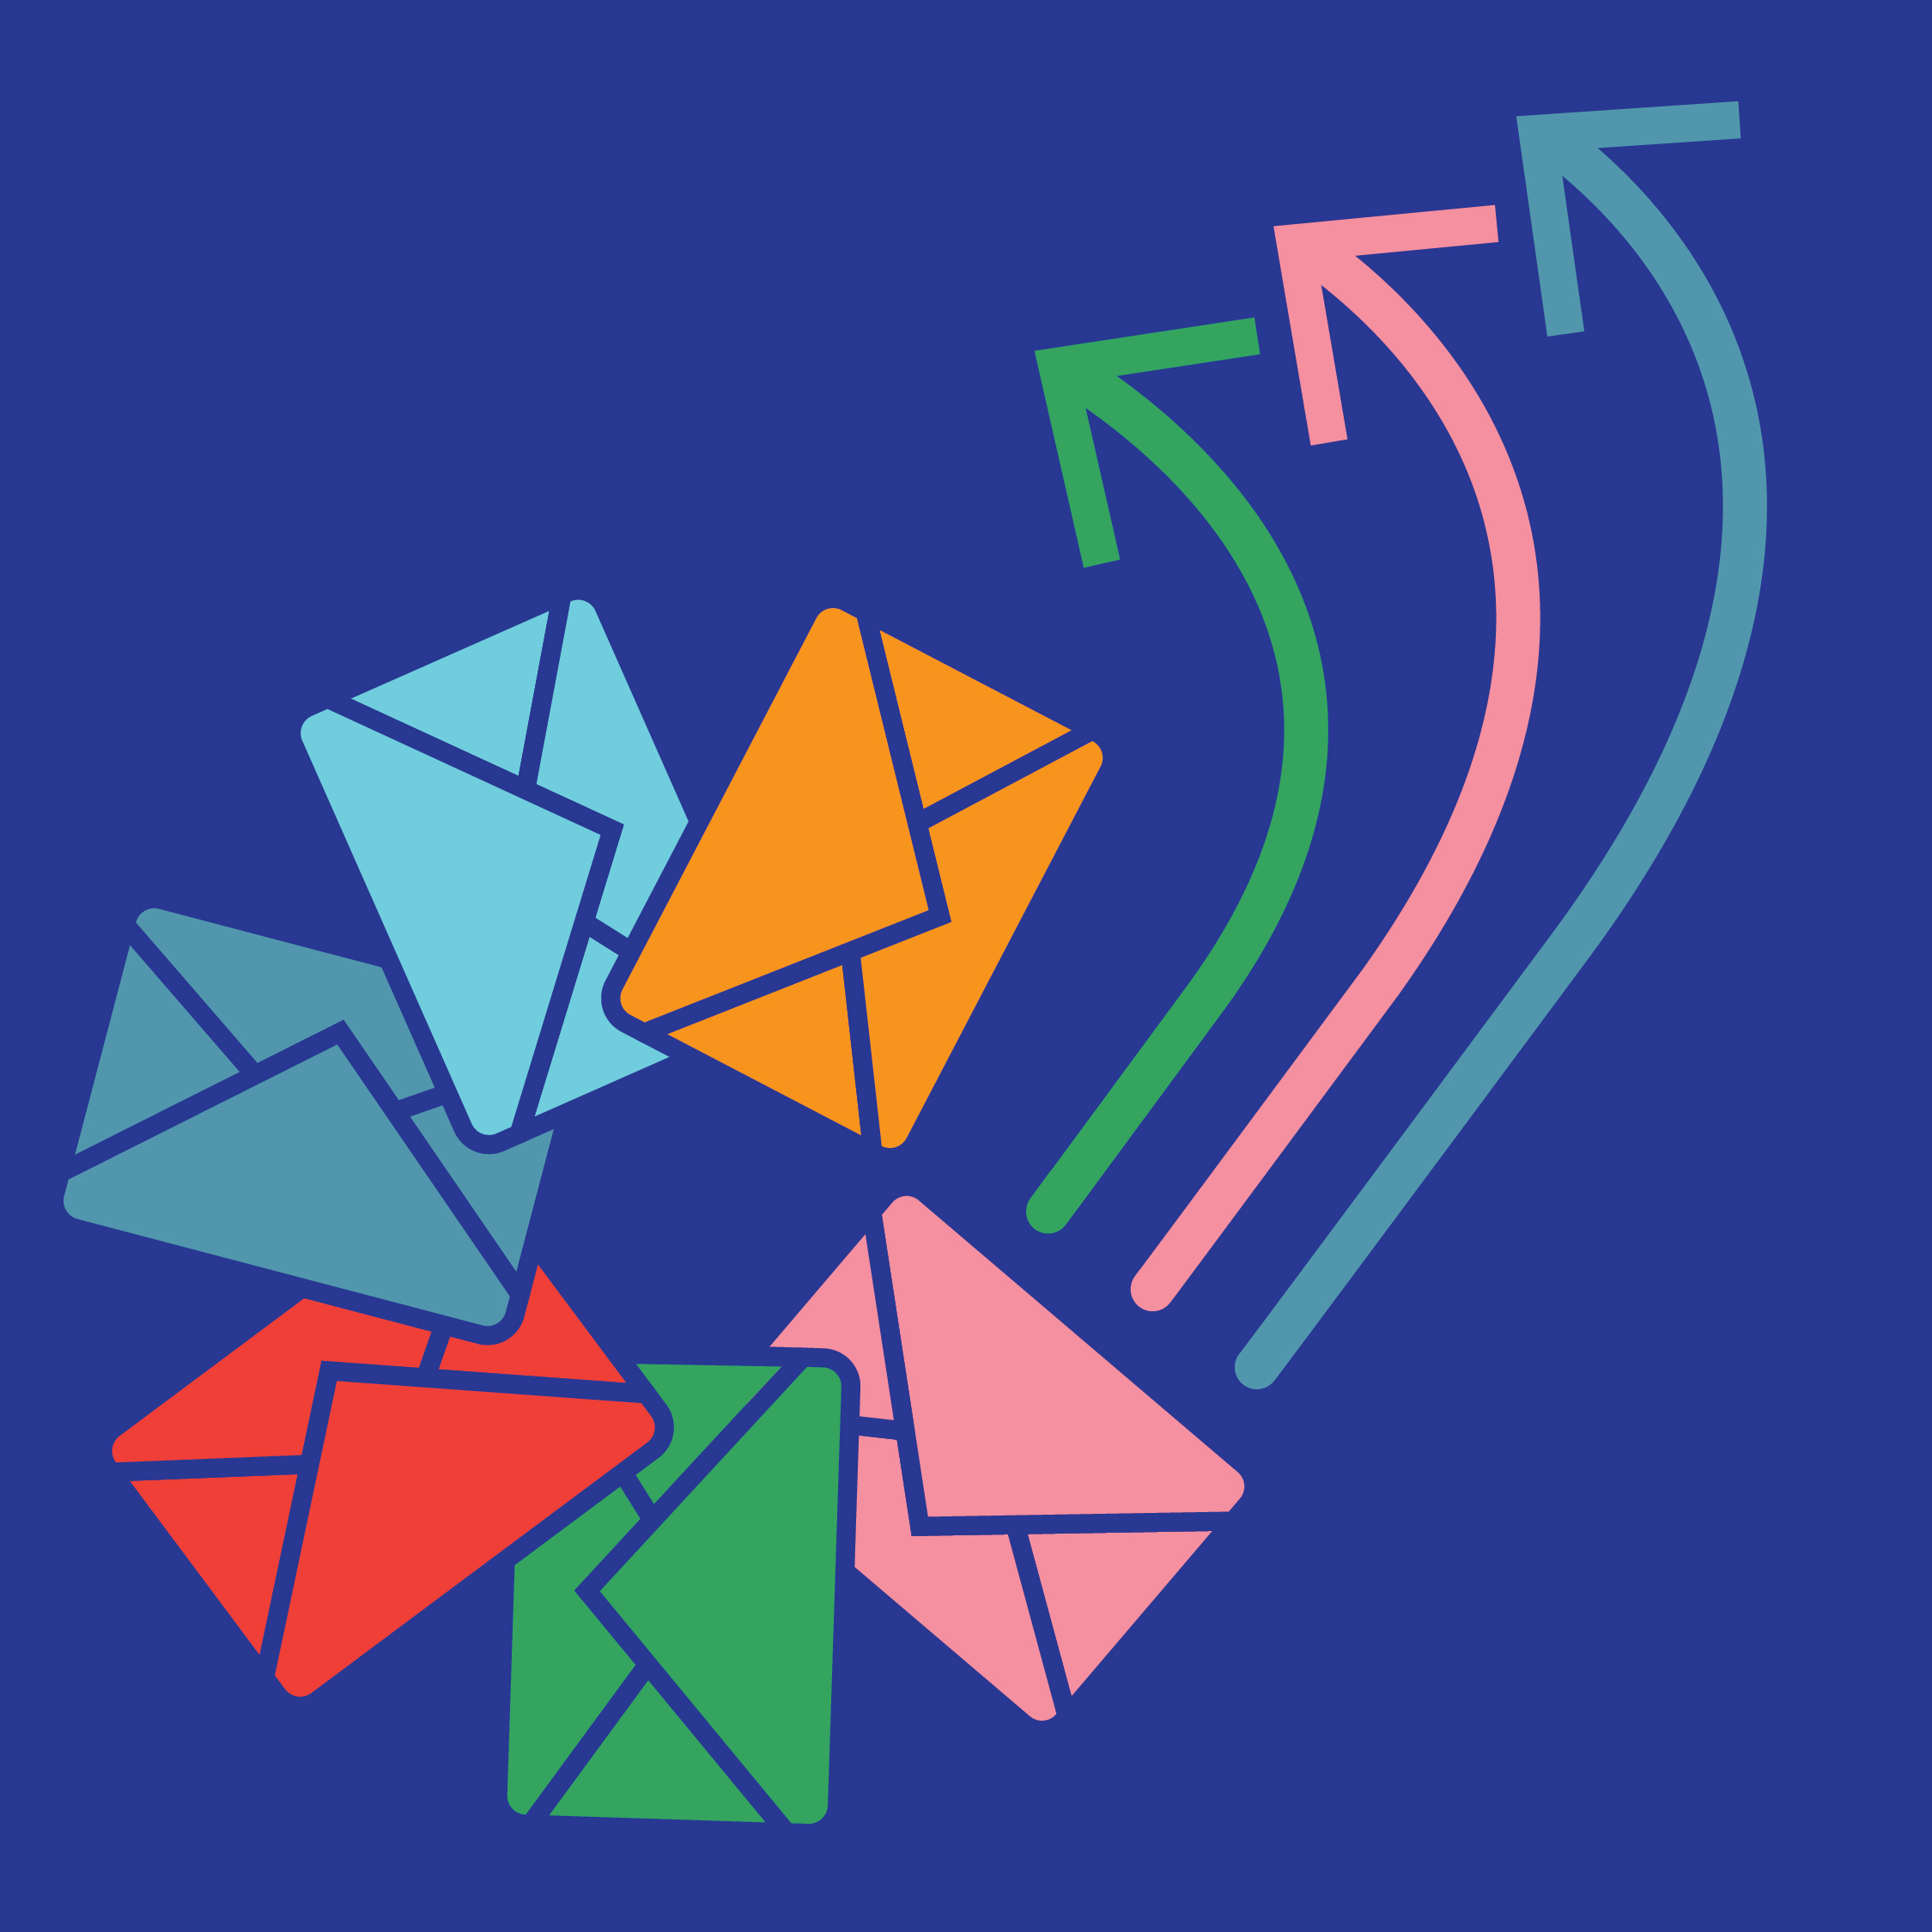 Multicolor envelopes and arrows on a dark blue background